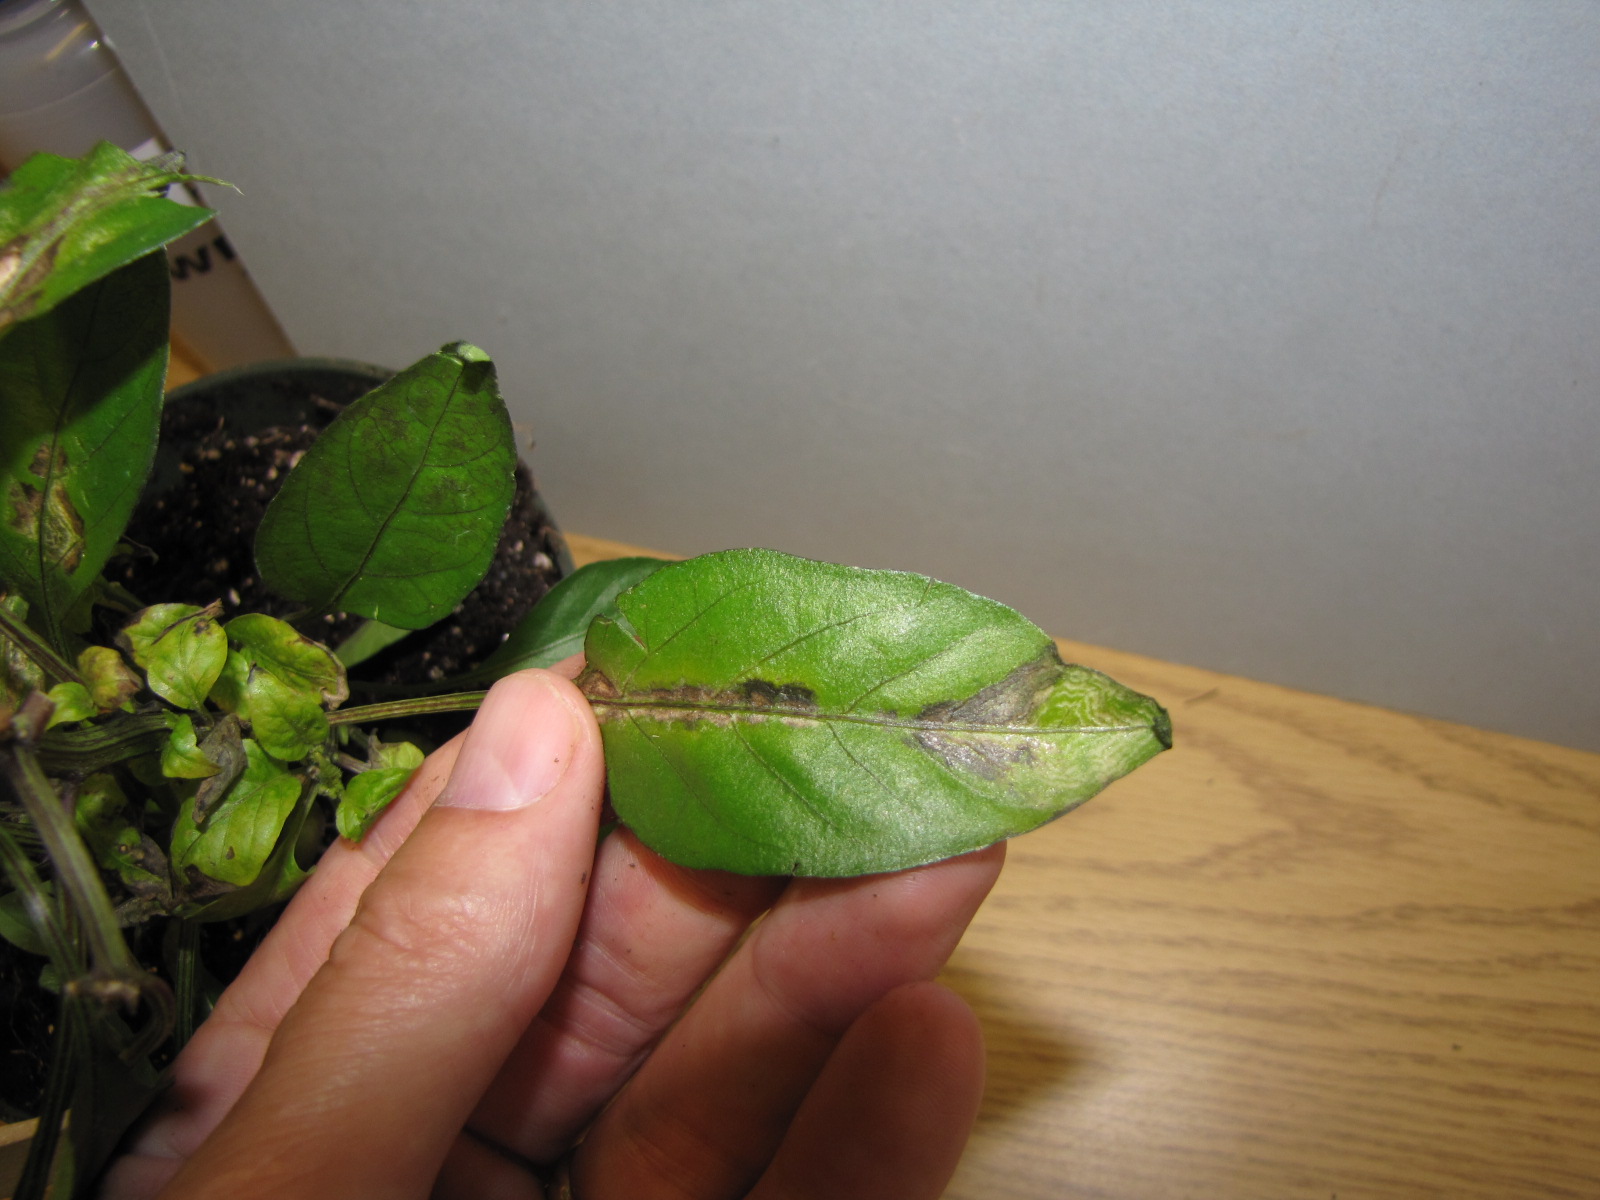 Lesion with ring-like structure due to tomato spotted wilt virus on pepper.